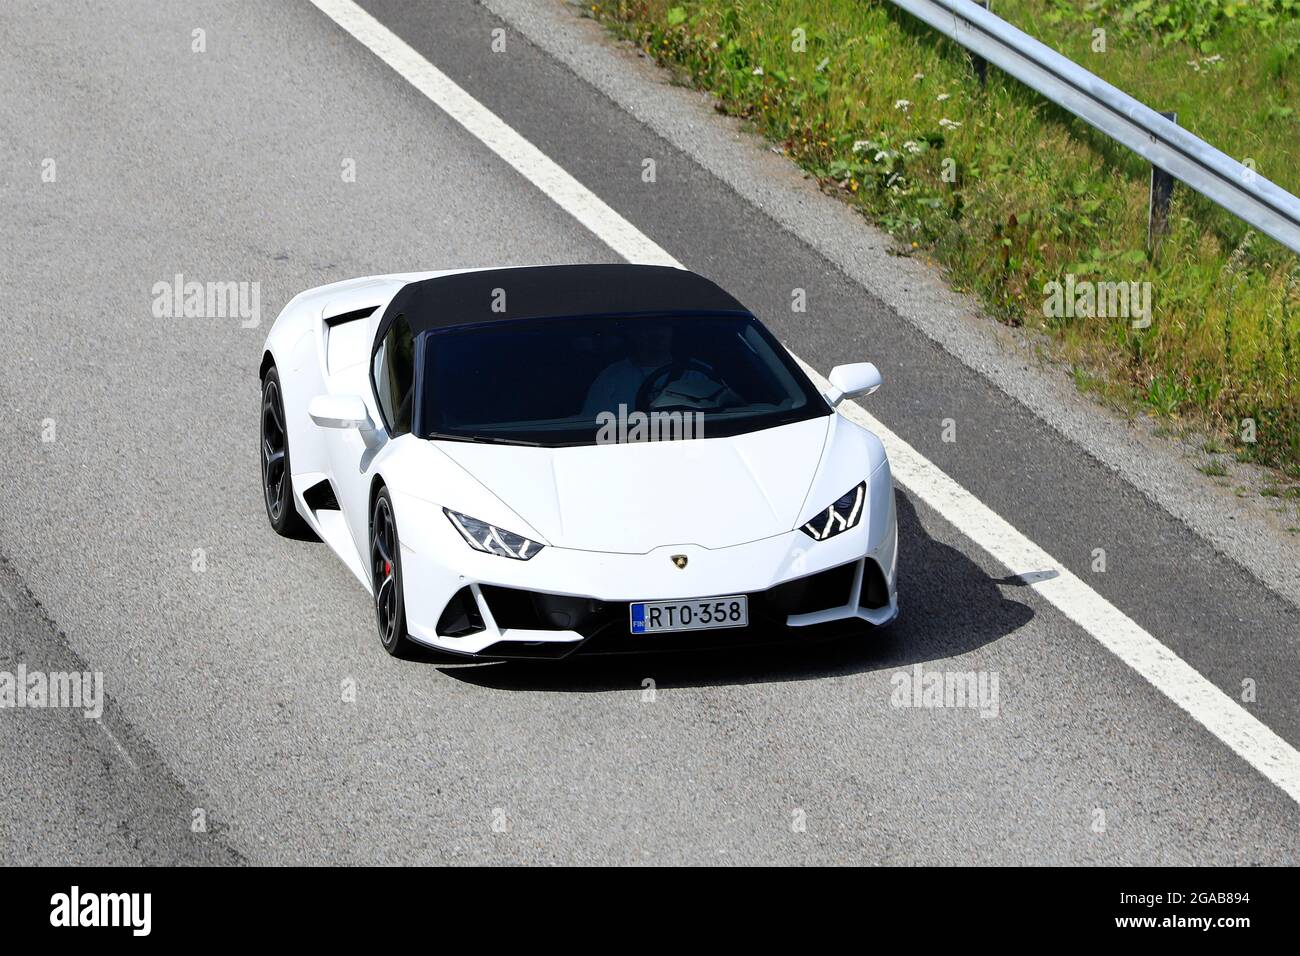 White Lamborghini Huracán LP 580-2 Spyder supercar at speed on motorway E18, elevated view. Salo, Finland. July 23, 2021. Stock Photo